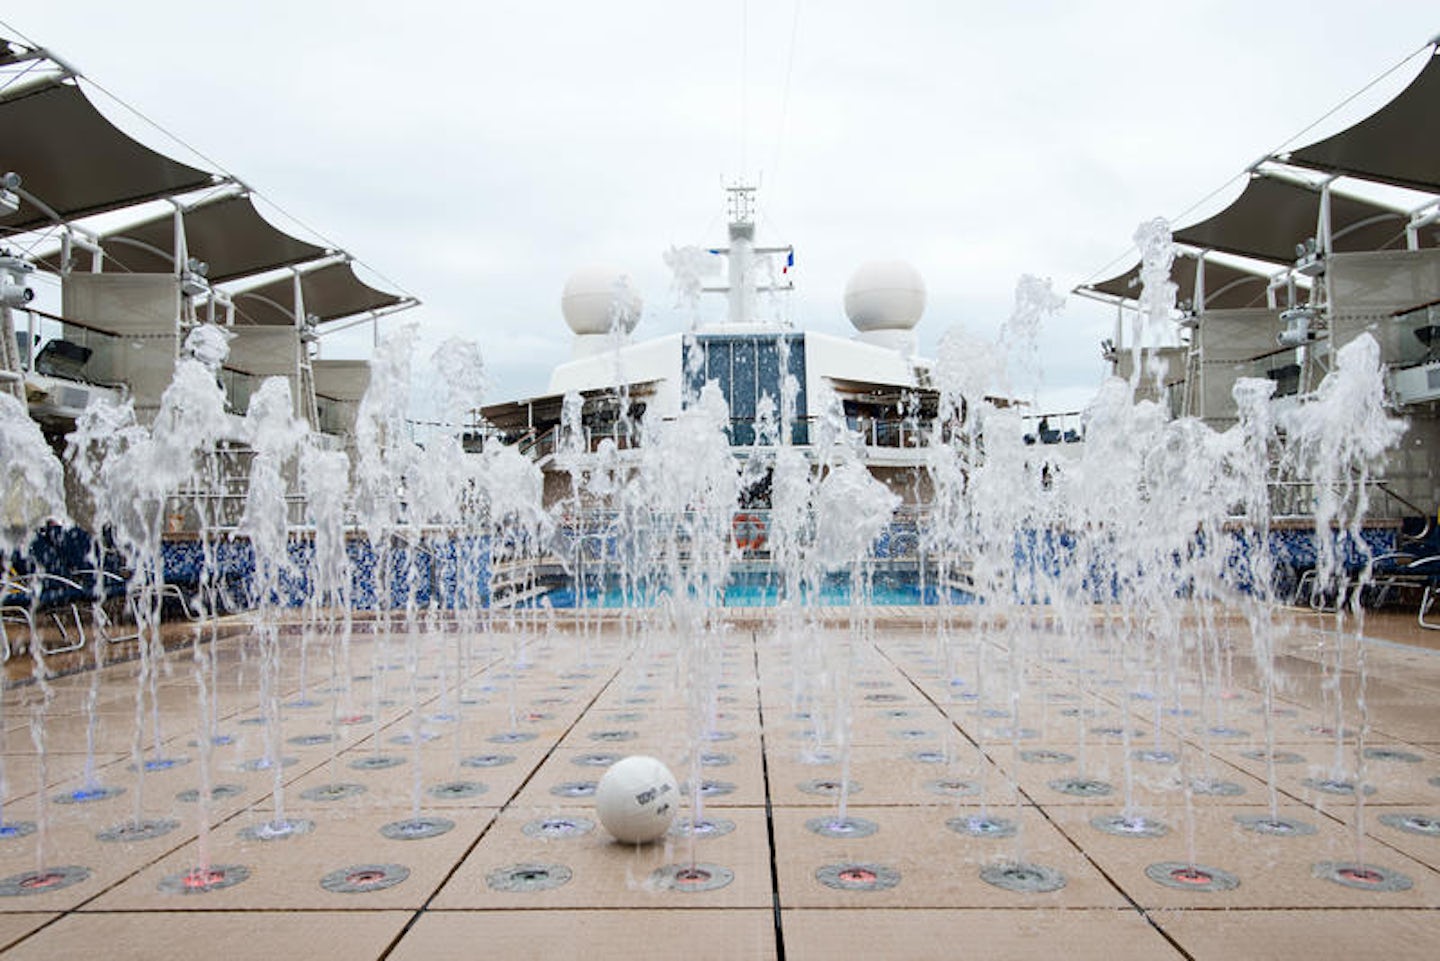 The Fountain on Celebrity Eclipse